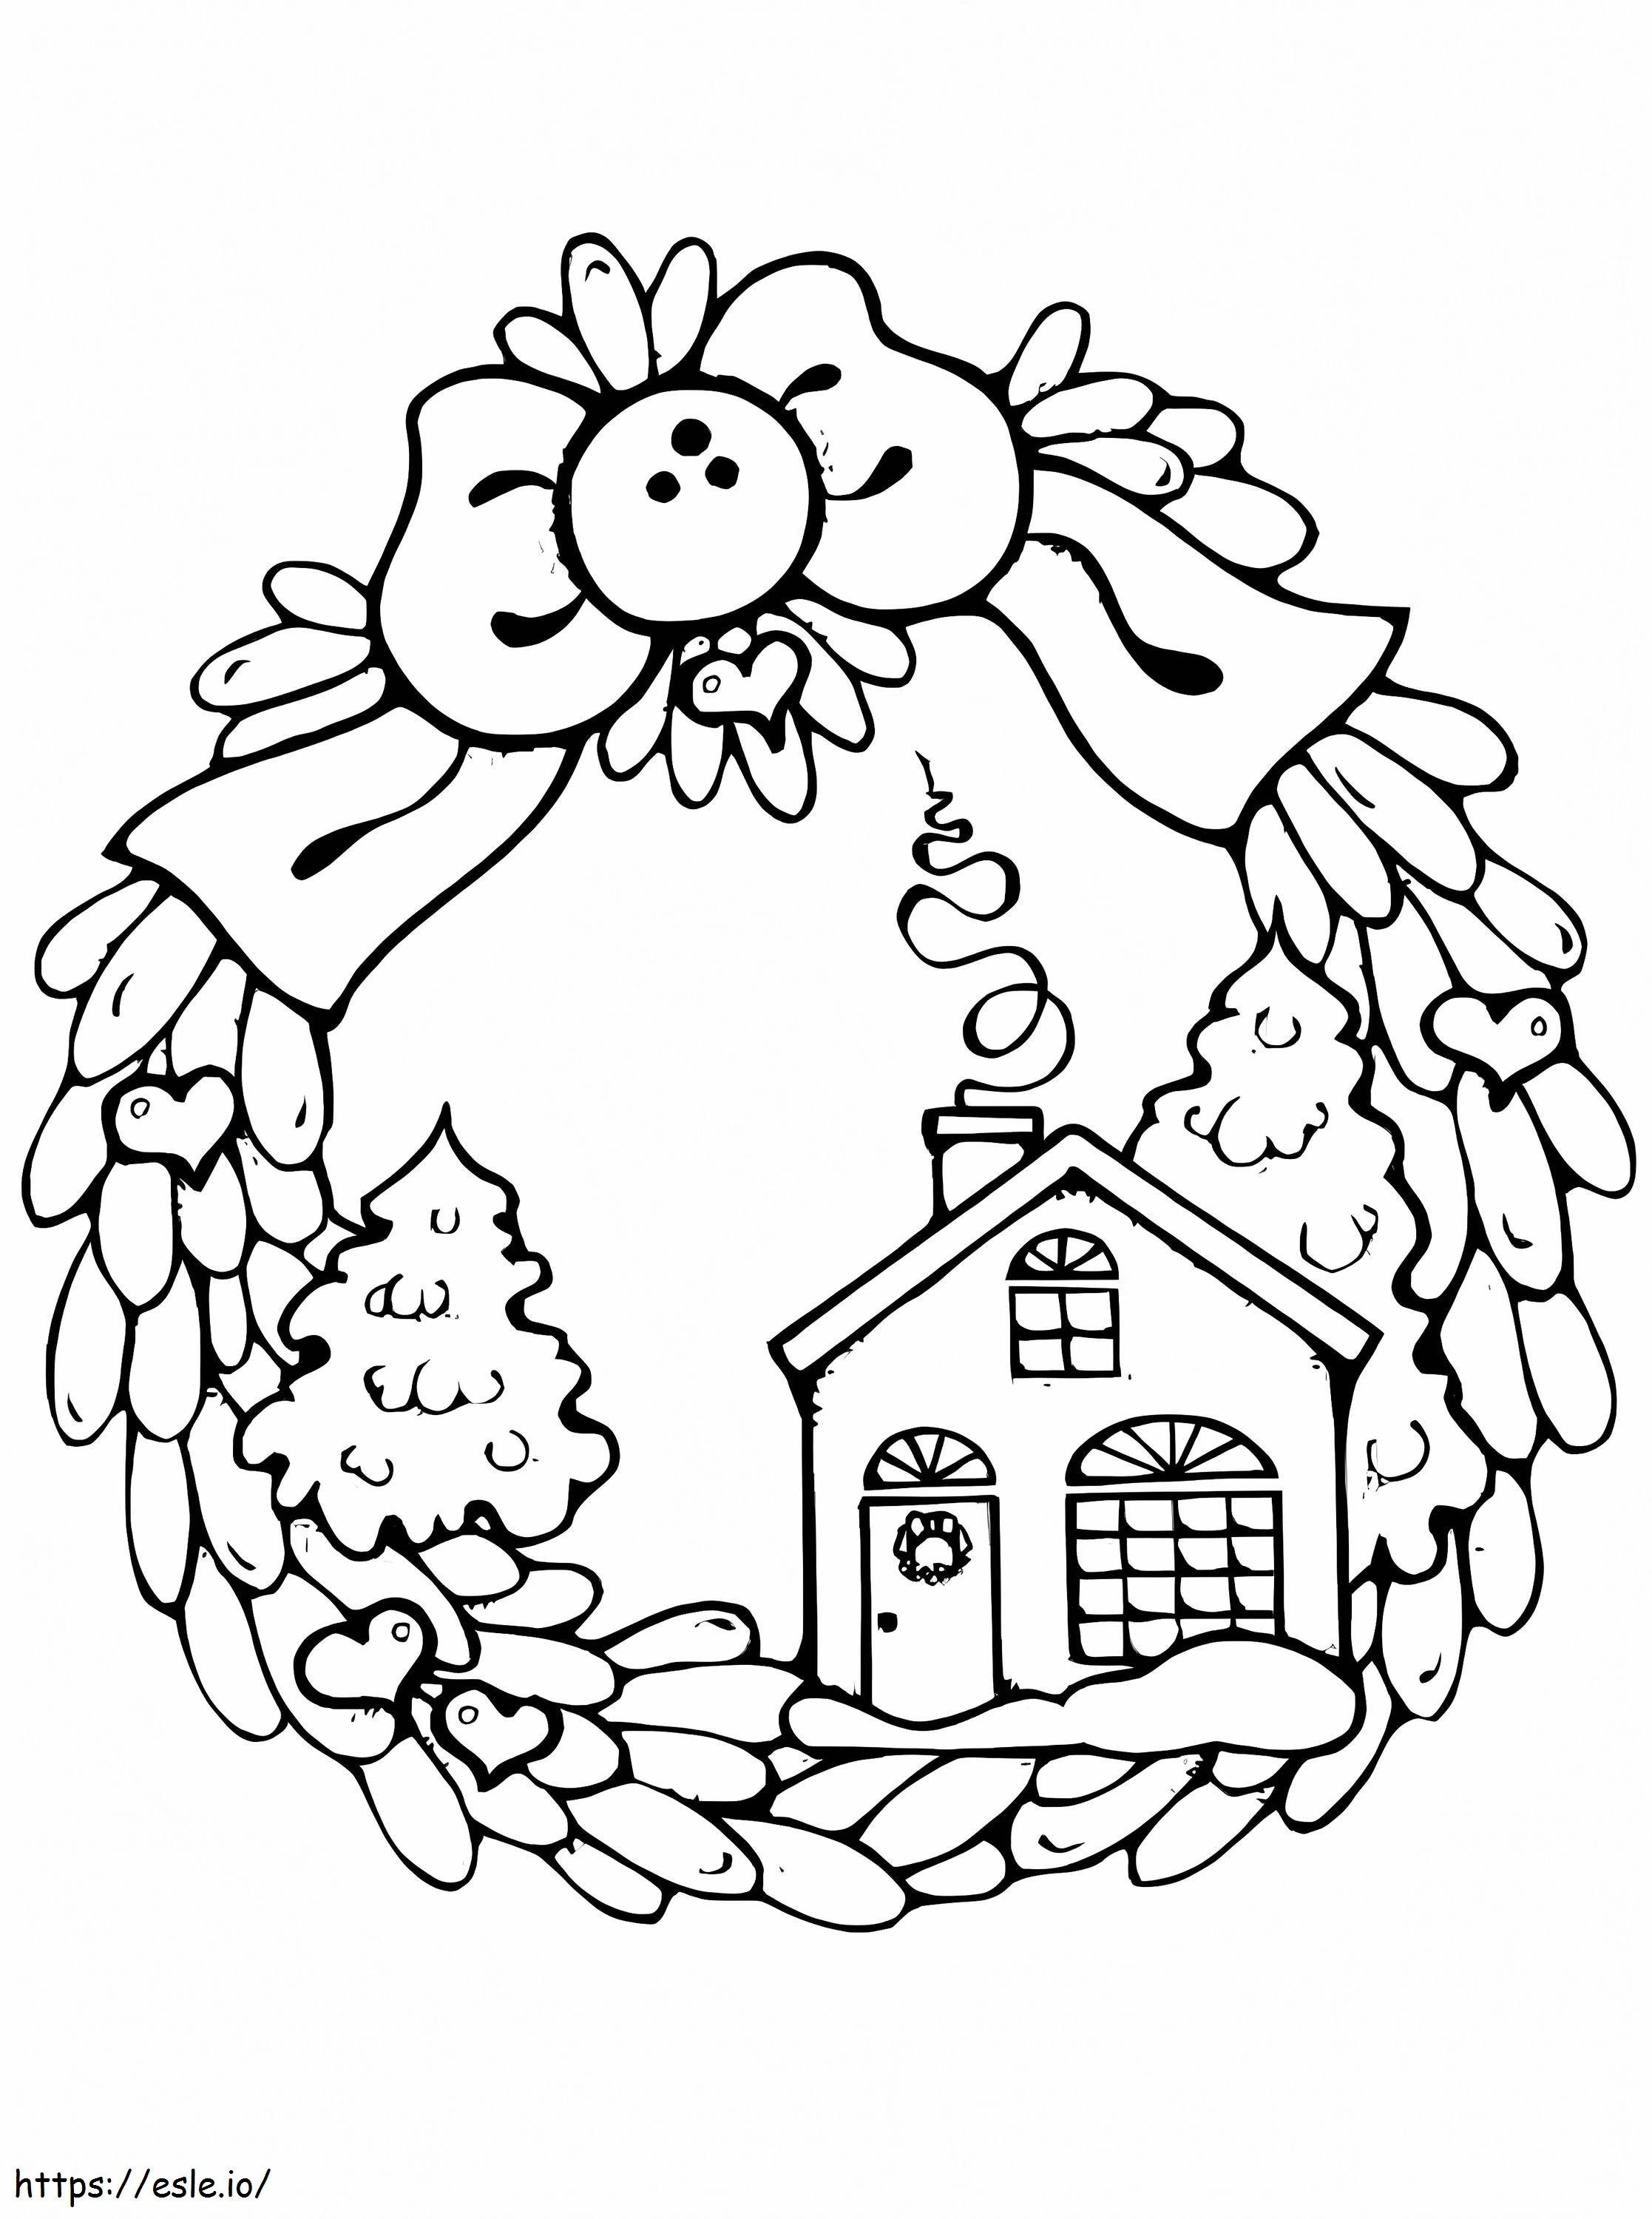 January Wreath coloring page